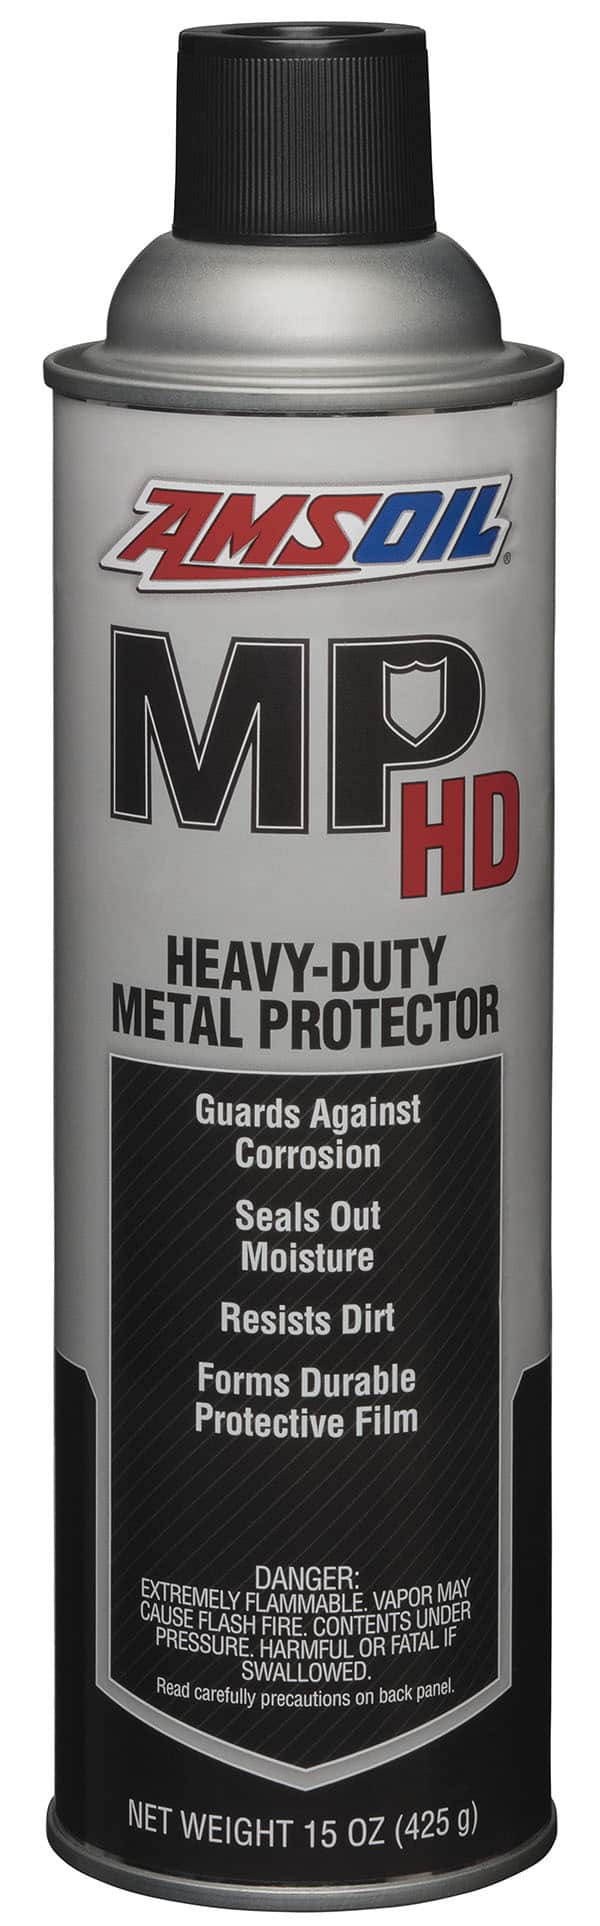 A can of AMSOIL Heavy-Duty Metal Protector - an easy-to-use spray-on that protects metal surfaces exposed to the damaging effects of salt, moisture, etc.